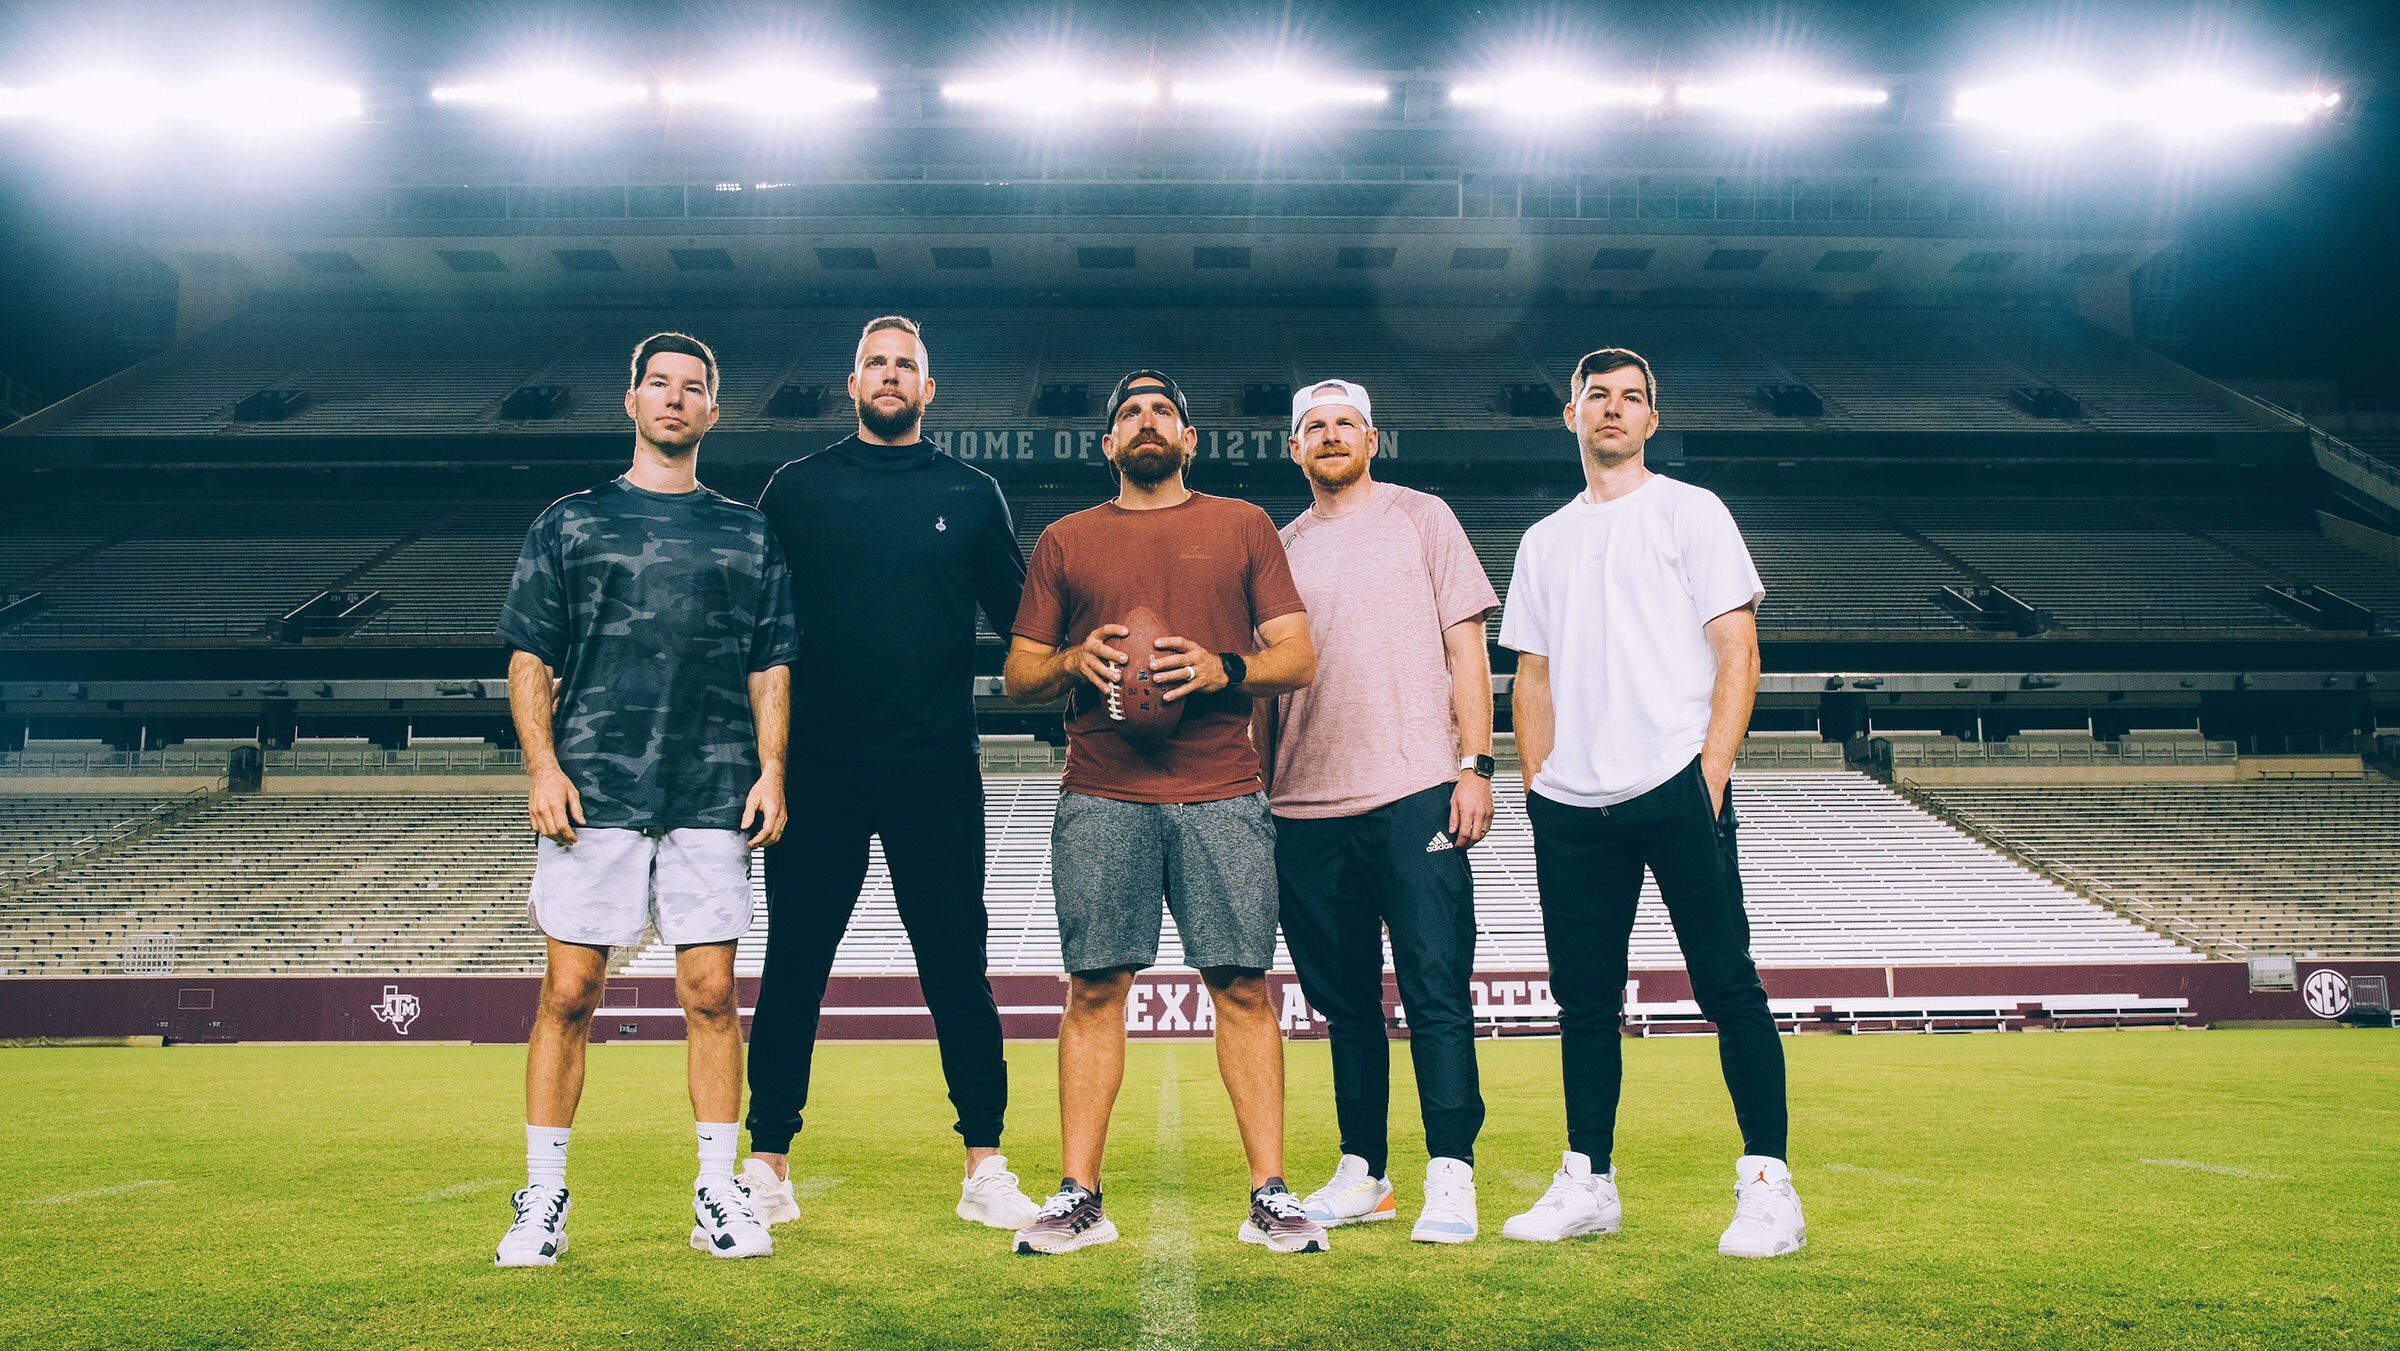 Members of Dude Perfect standing on Kyle Field with stadium lights in the background.